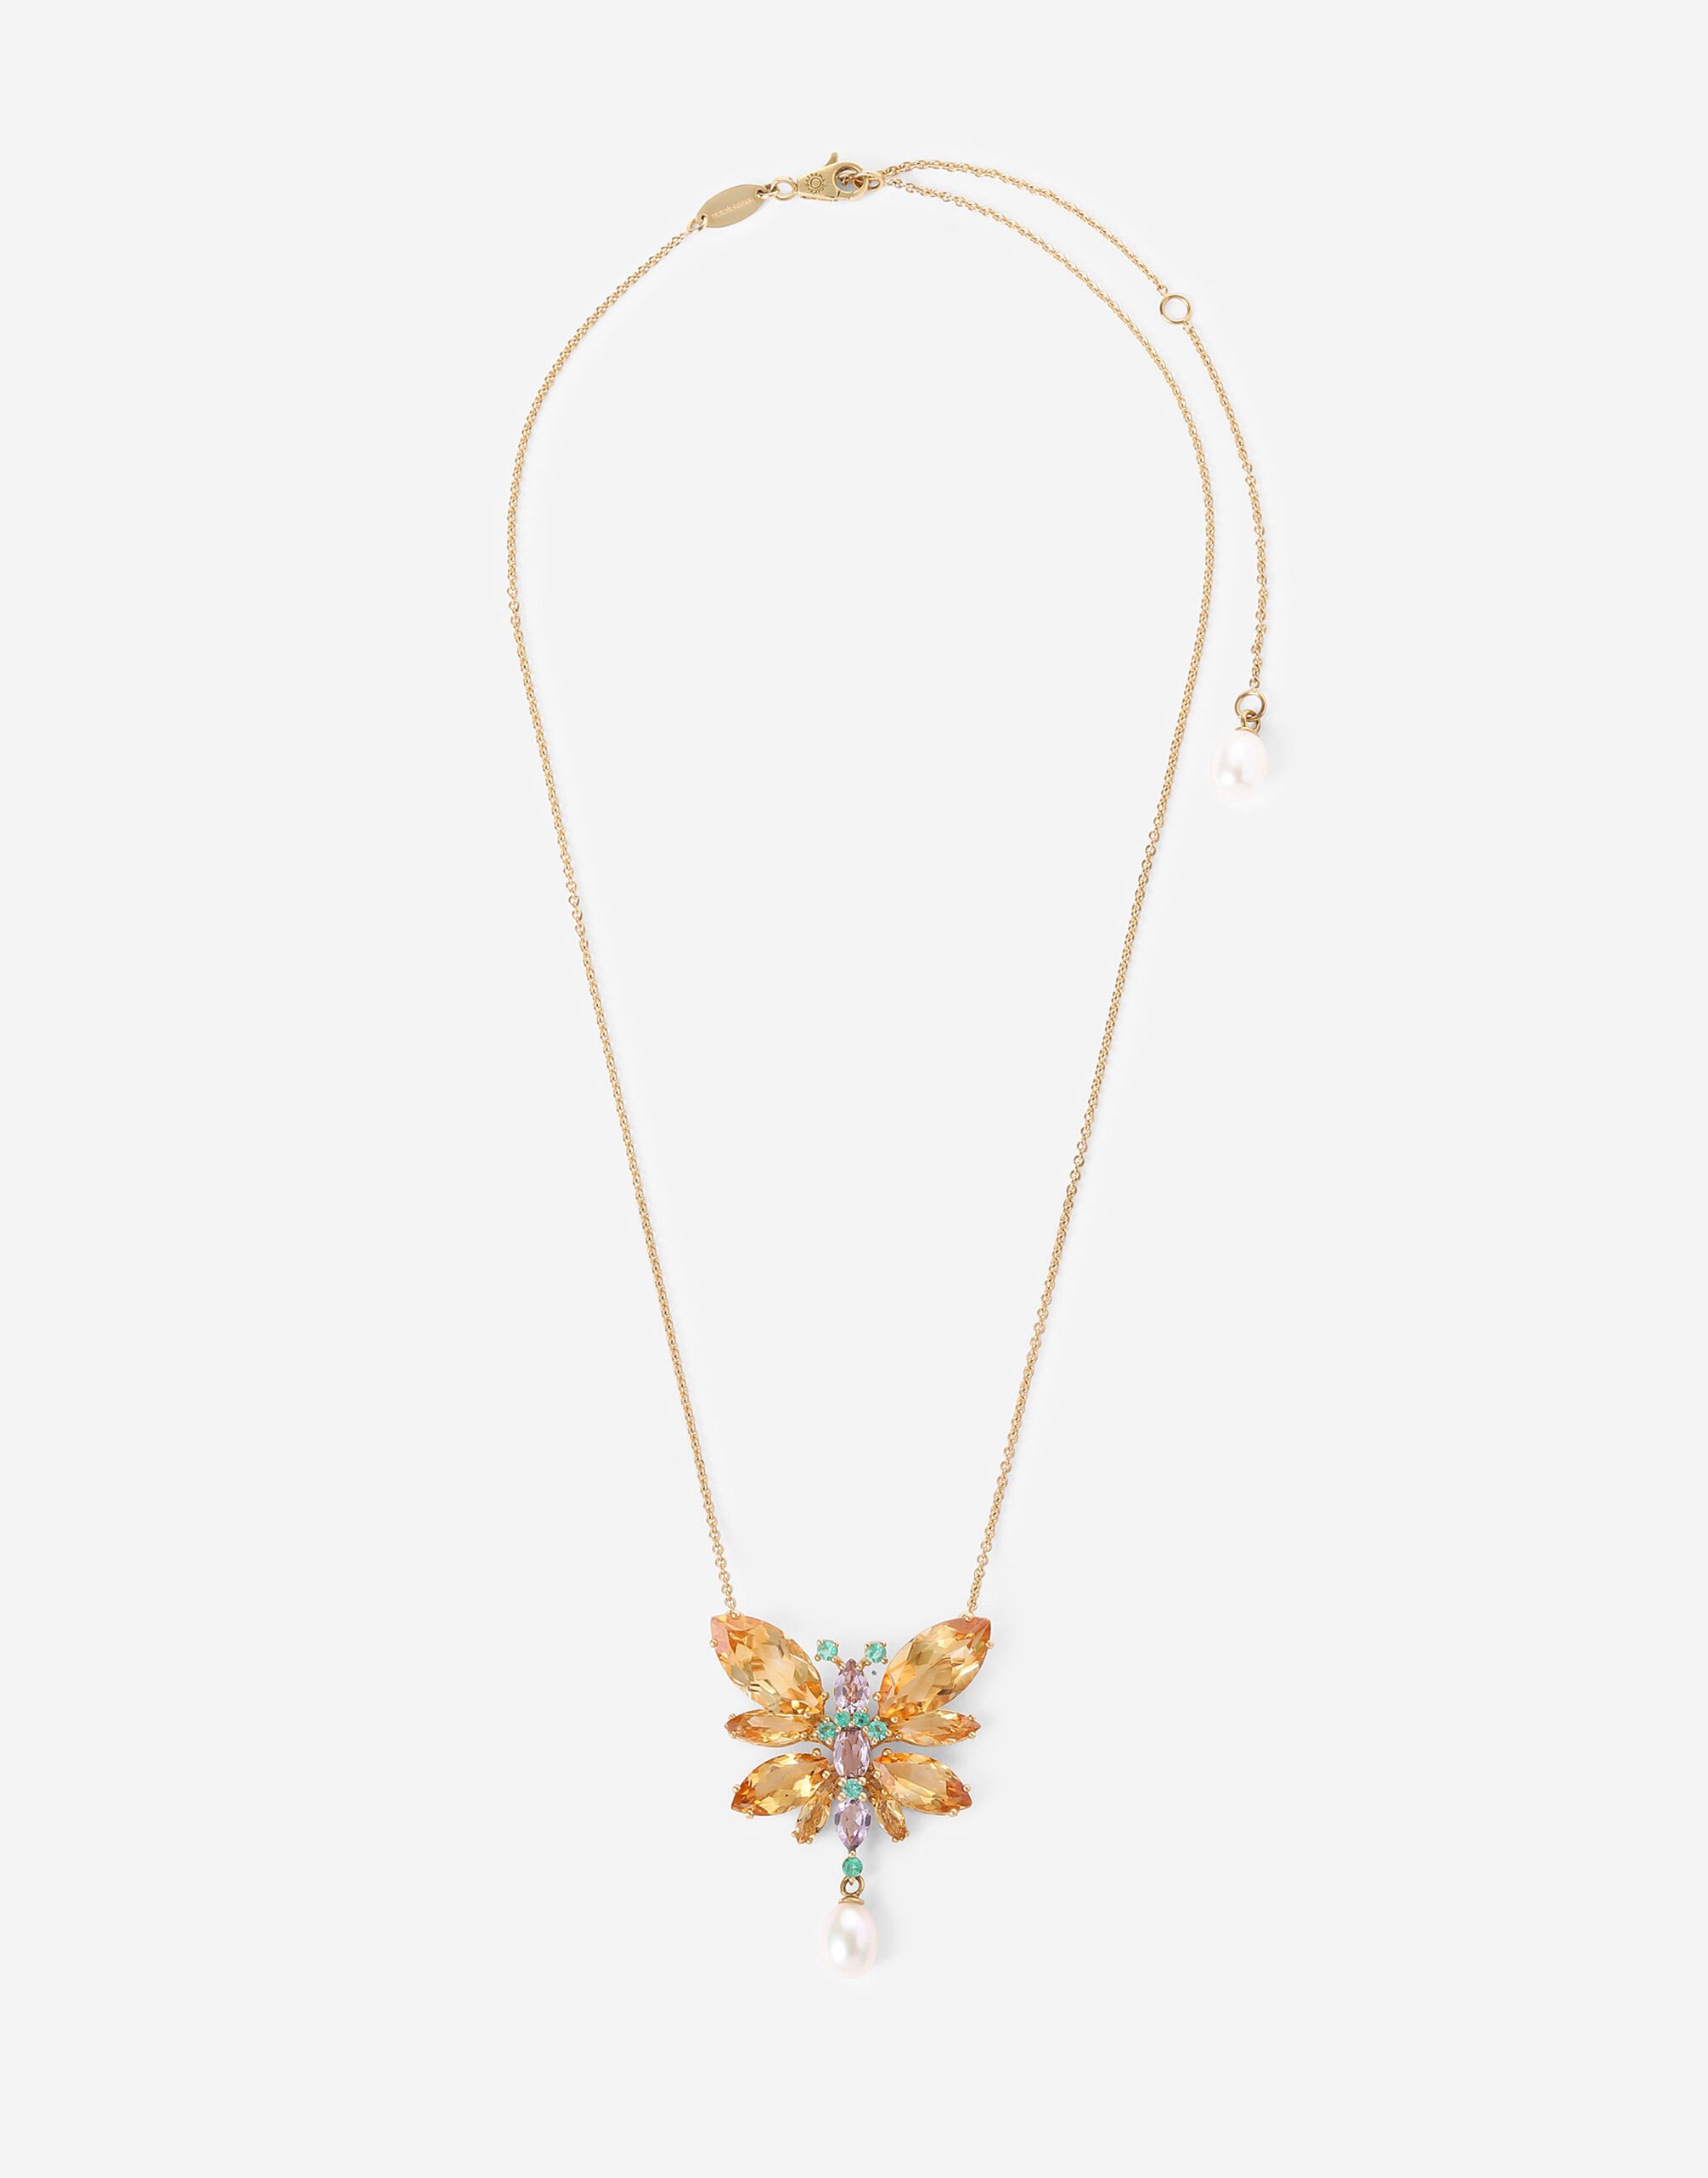 Dolce & Gabbana Spring necklace in yellow 18kt gold with citrine butterfly Gold WANR2GWMIXD